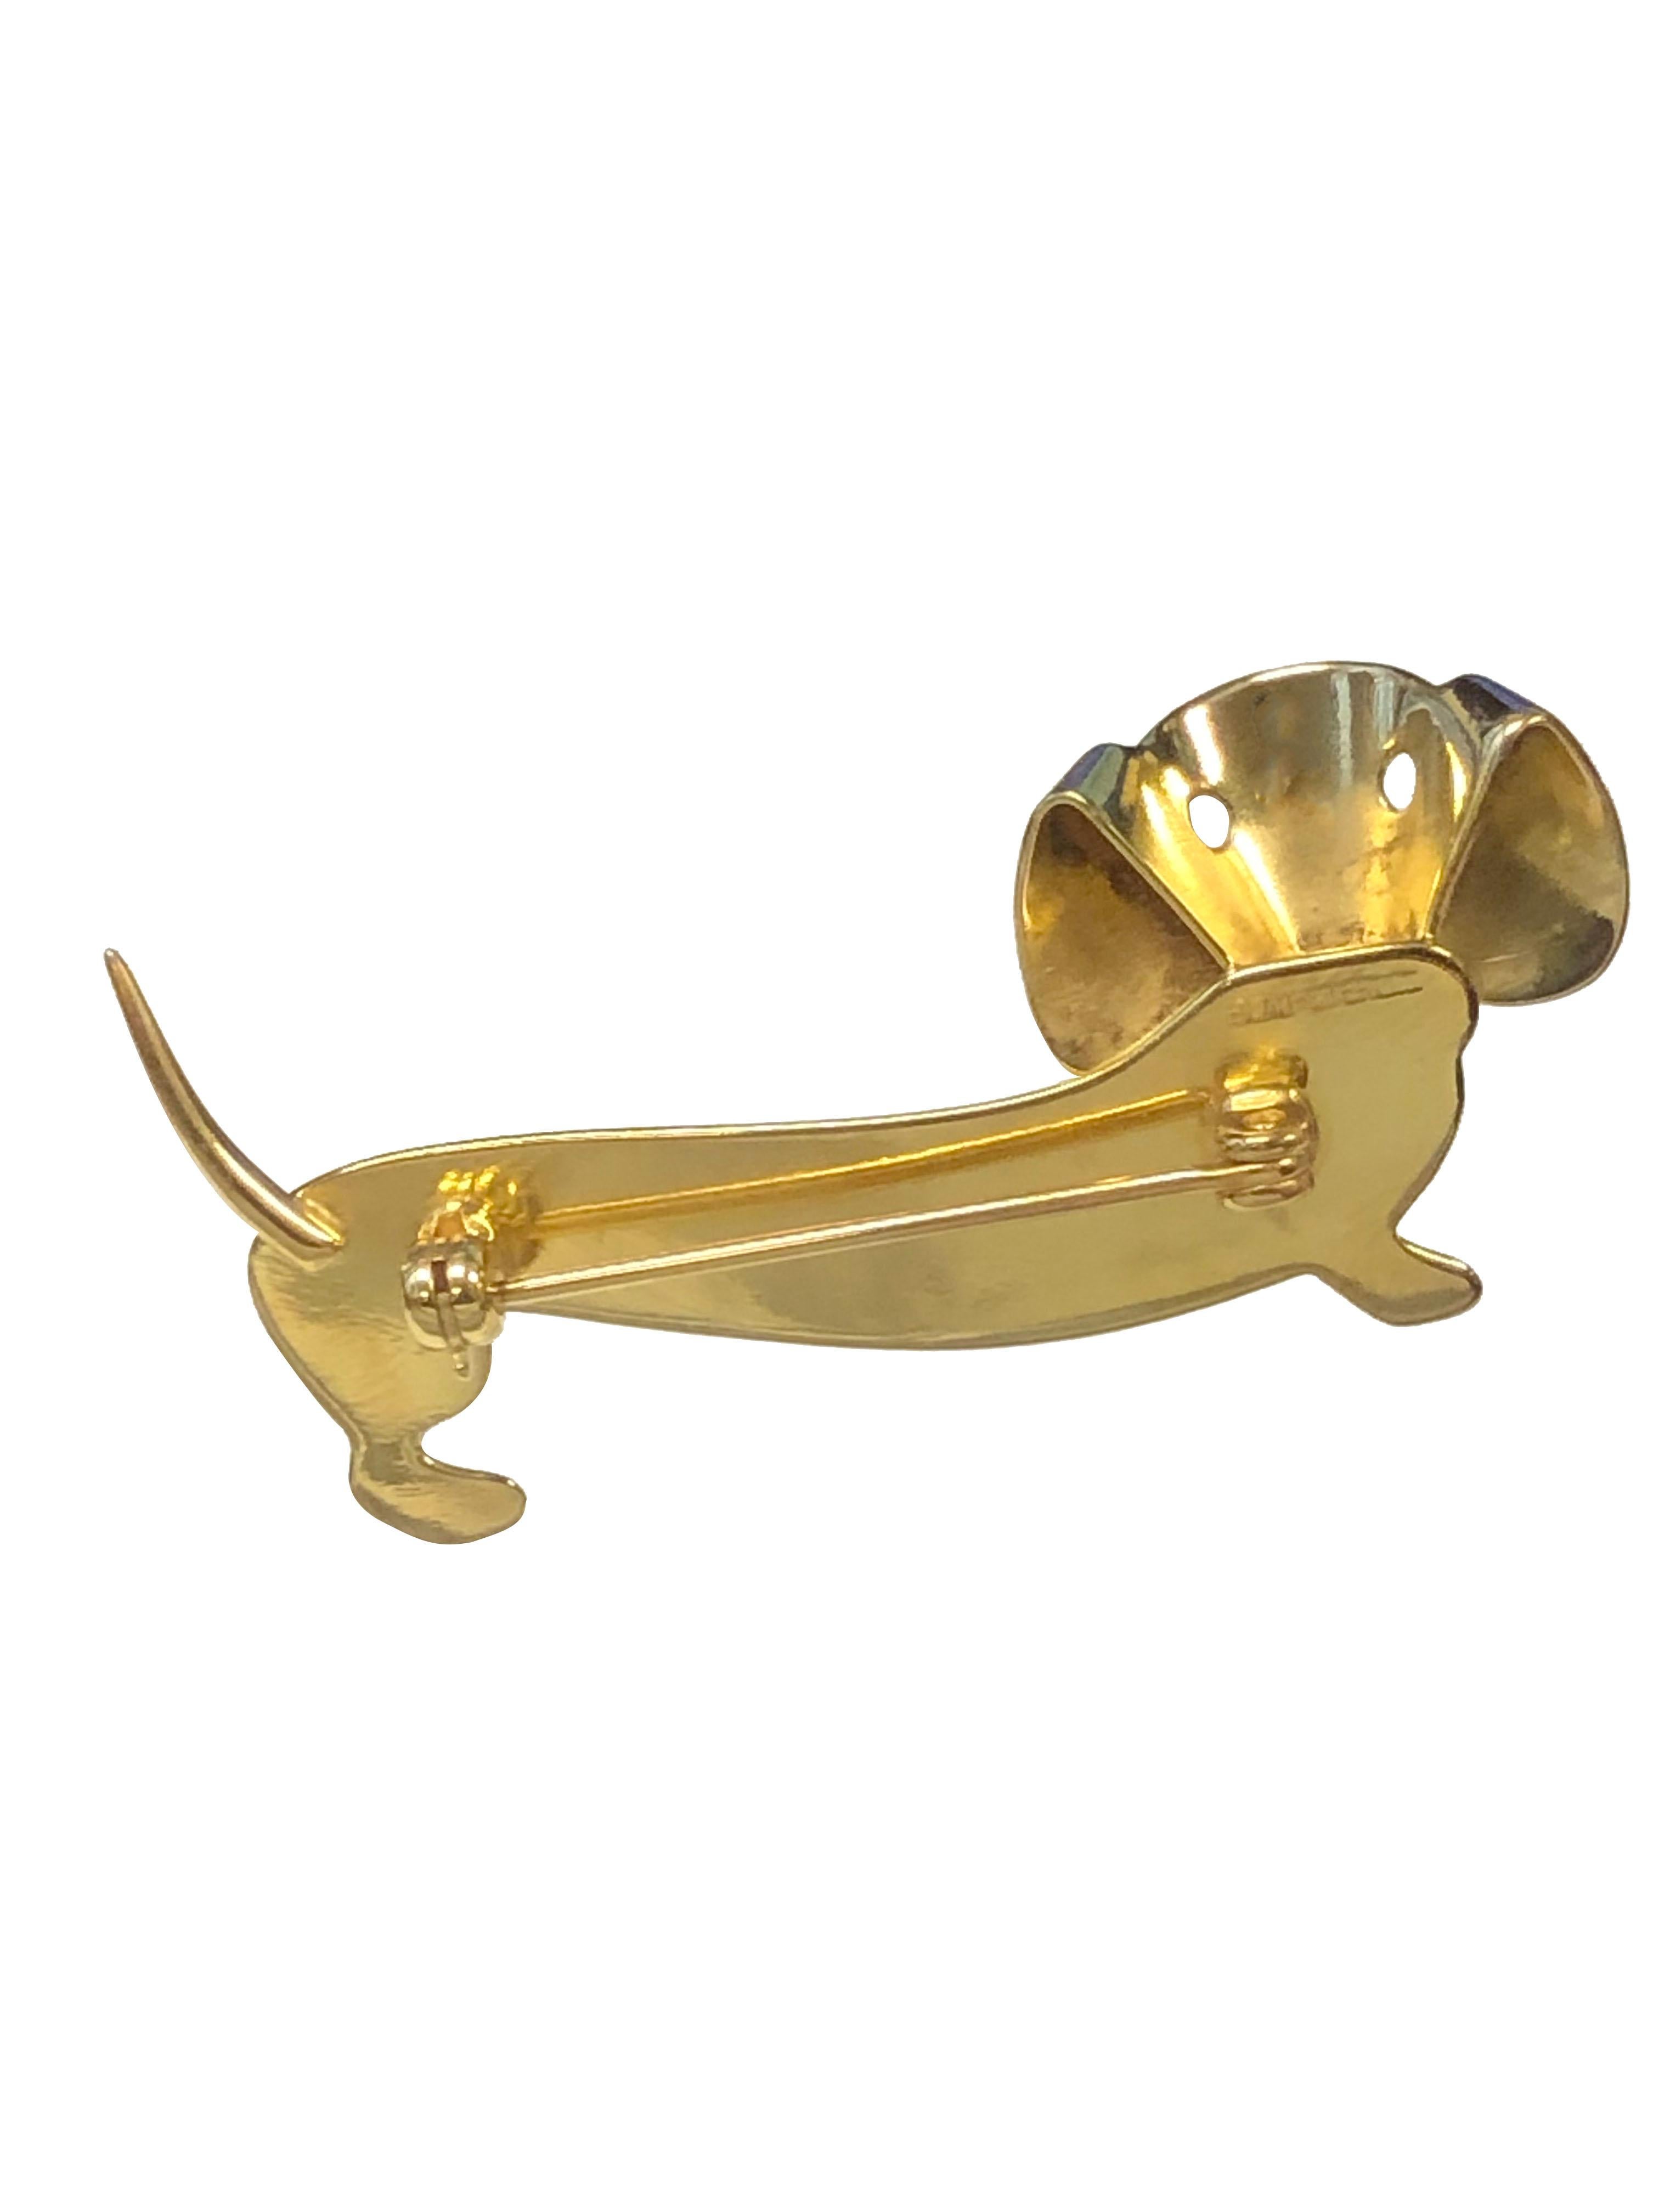 Circa 1960s Beau Vermeil, Gold Wash on Sterling Sterling Silver Dachshund Dog Brooch, measuring 1 3/4 inch in length x 3/4 inch.
